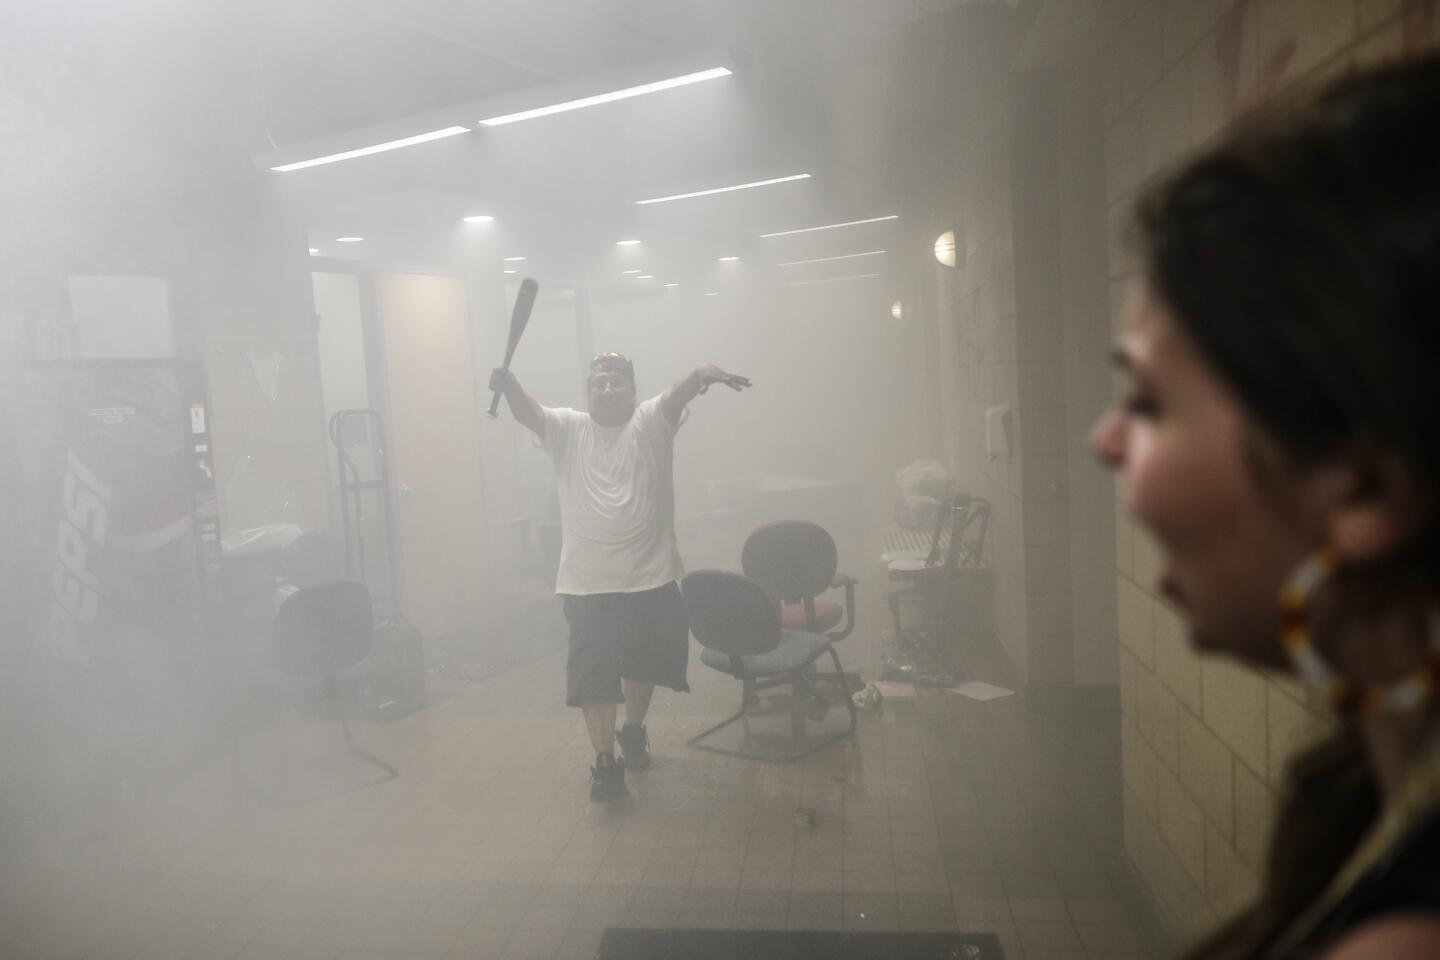 Protesters enter a smoke-filled part of Minneapolis' 3rd Police Precinct.